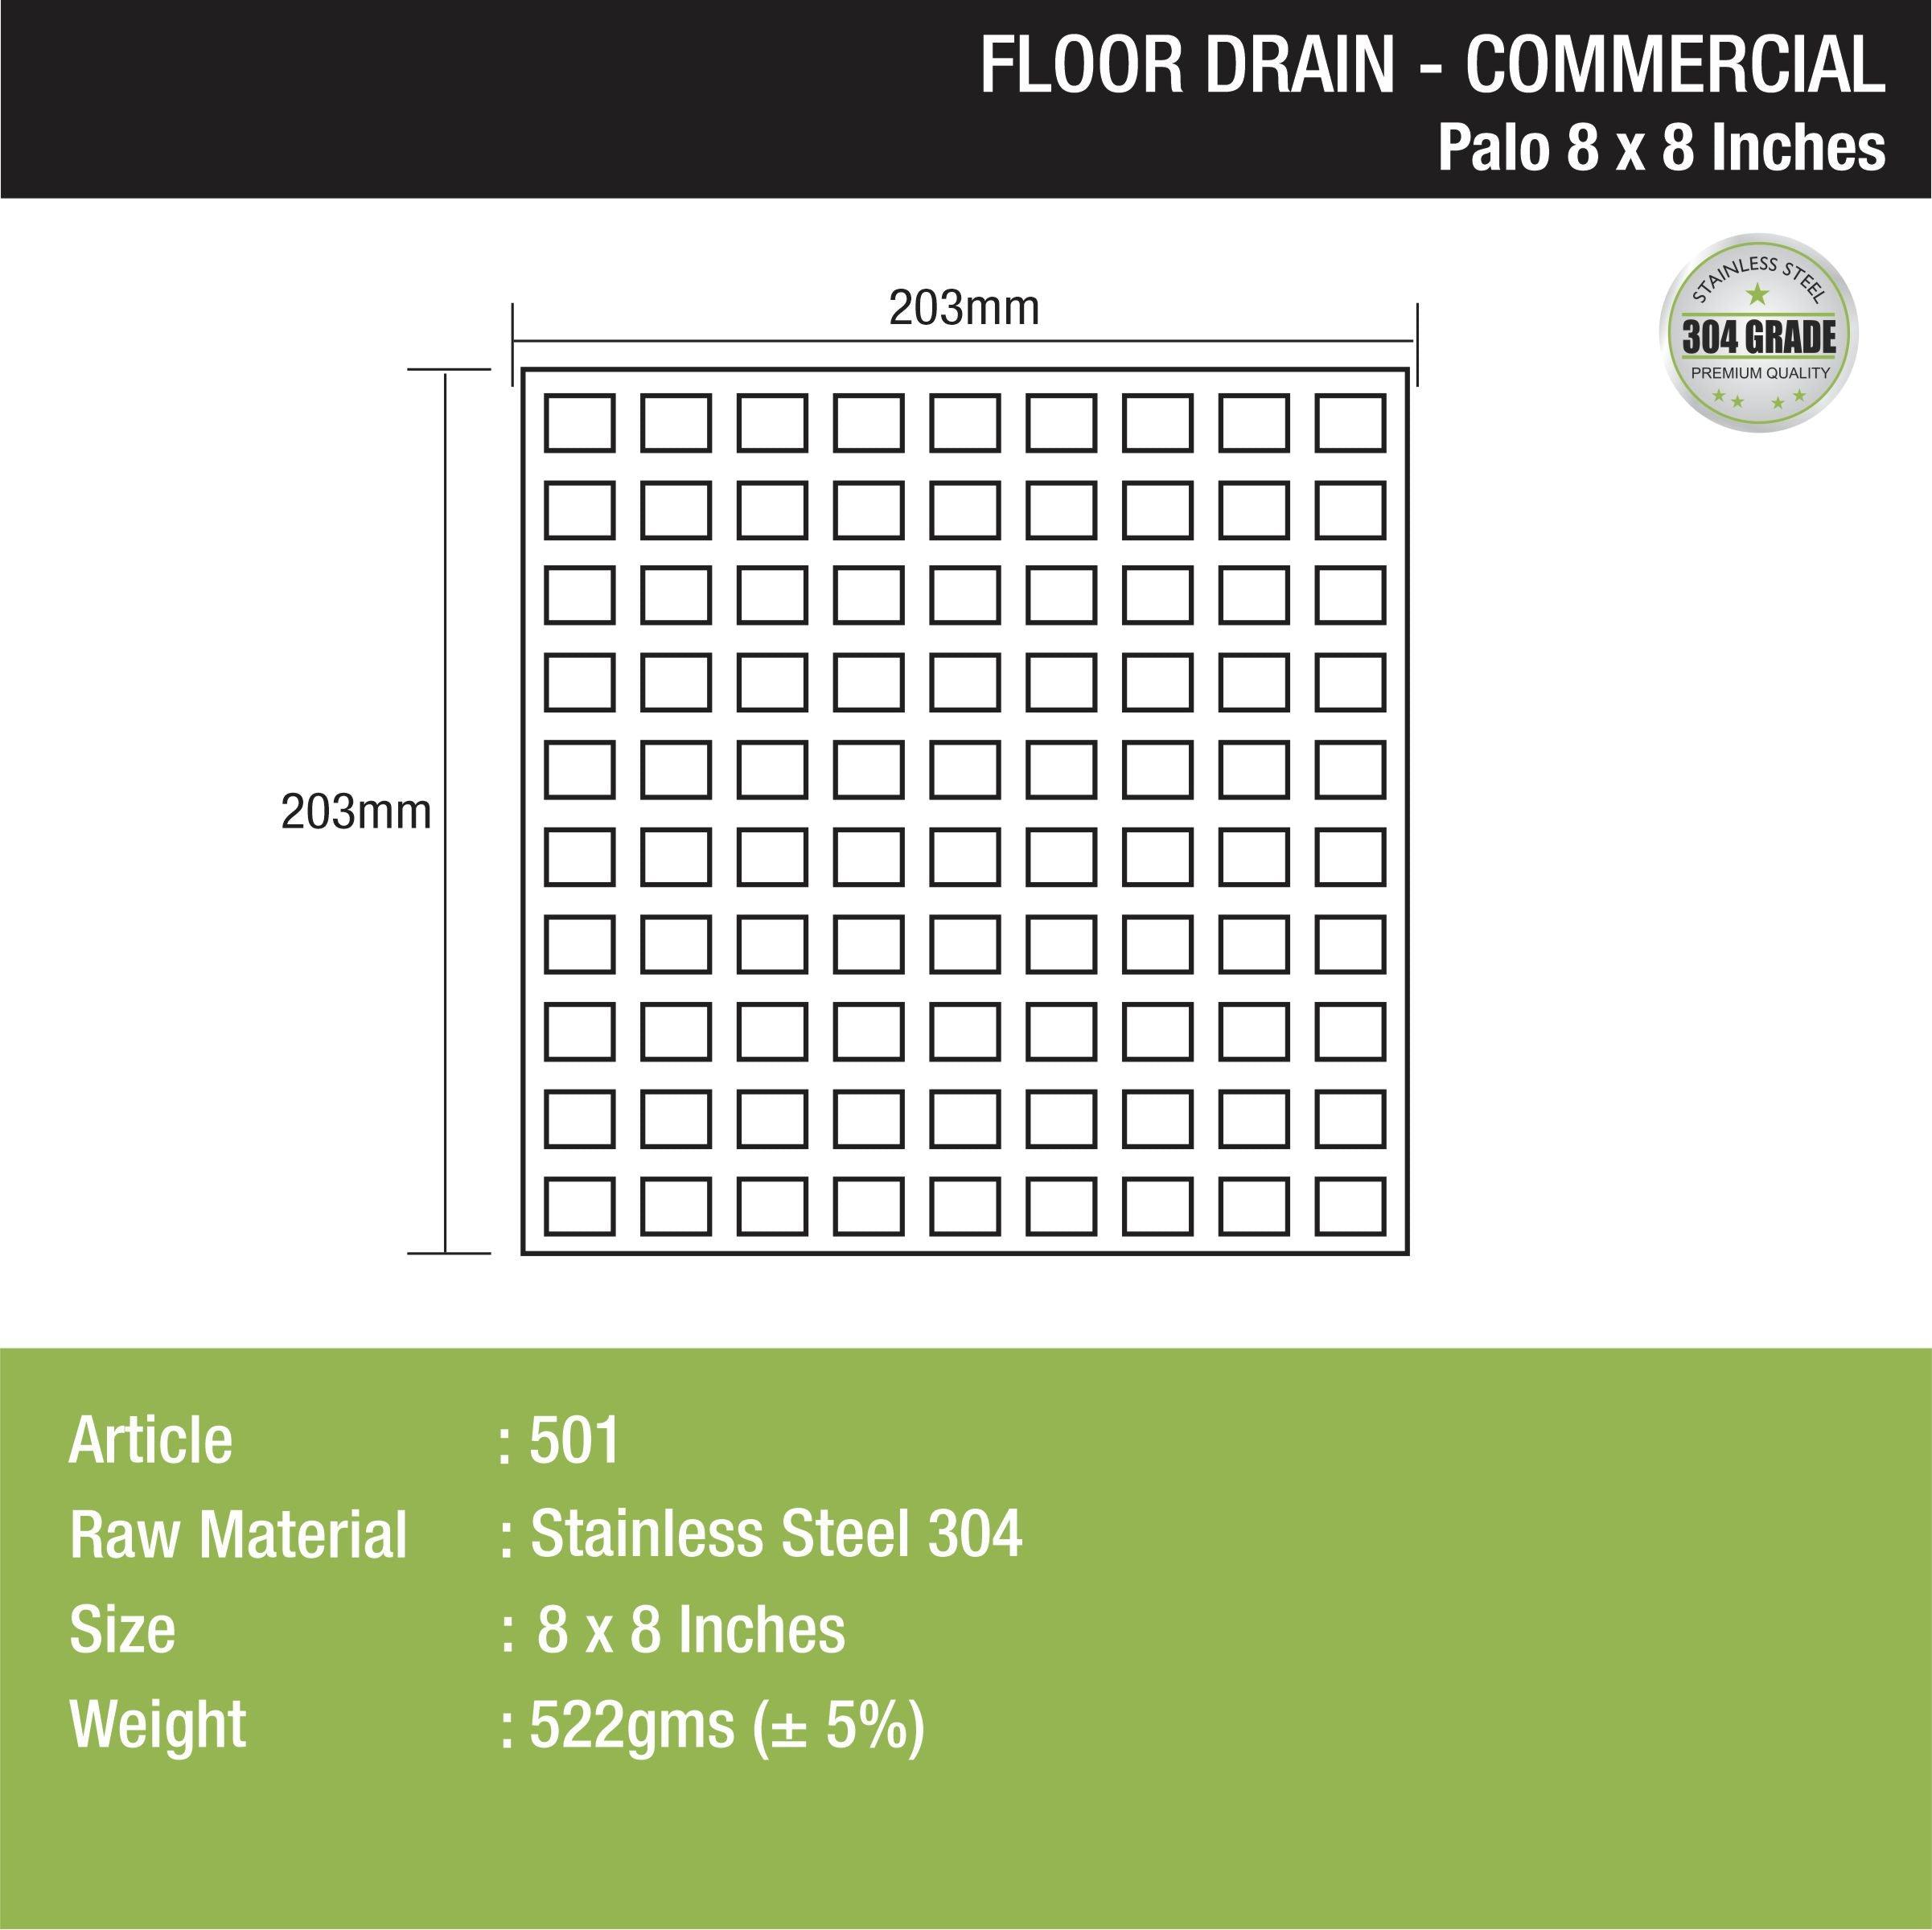 Palo Commercial Floor Drain (8 x 8 Inches) dimensions and sizes